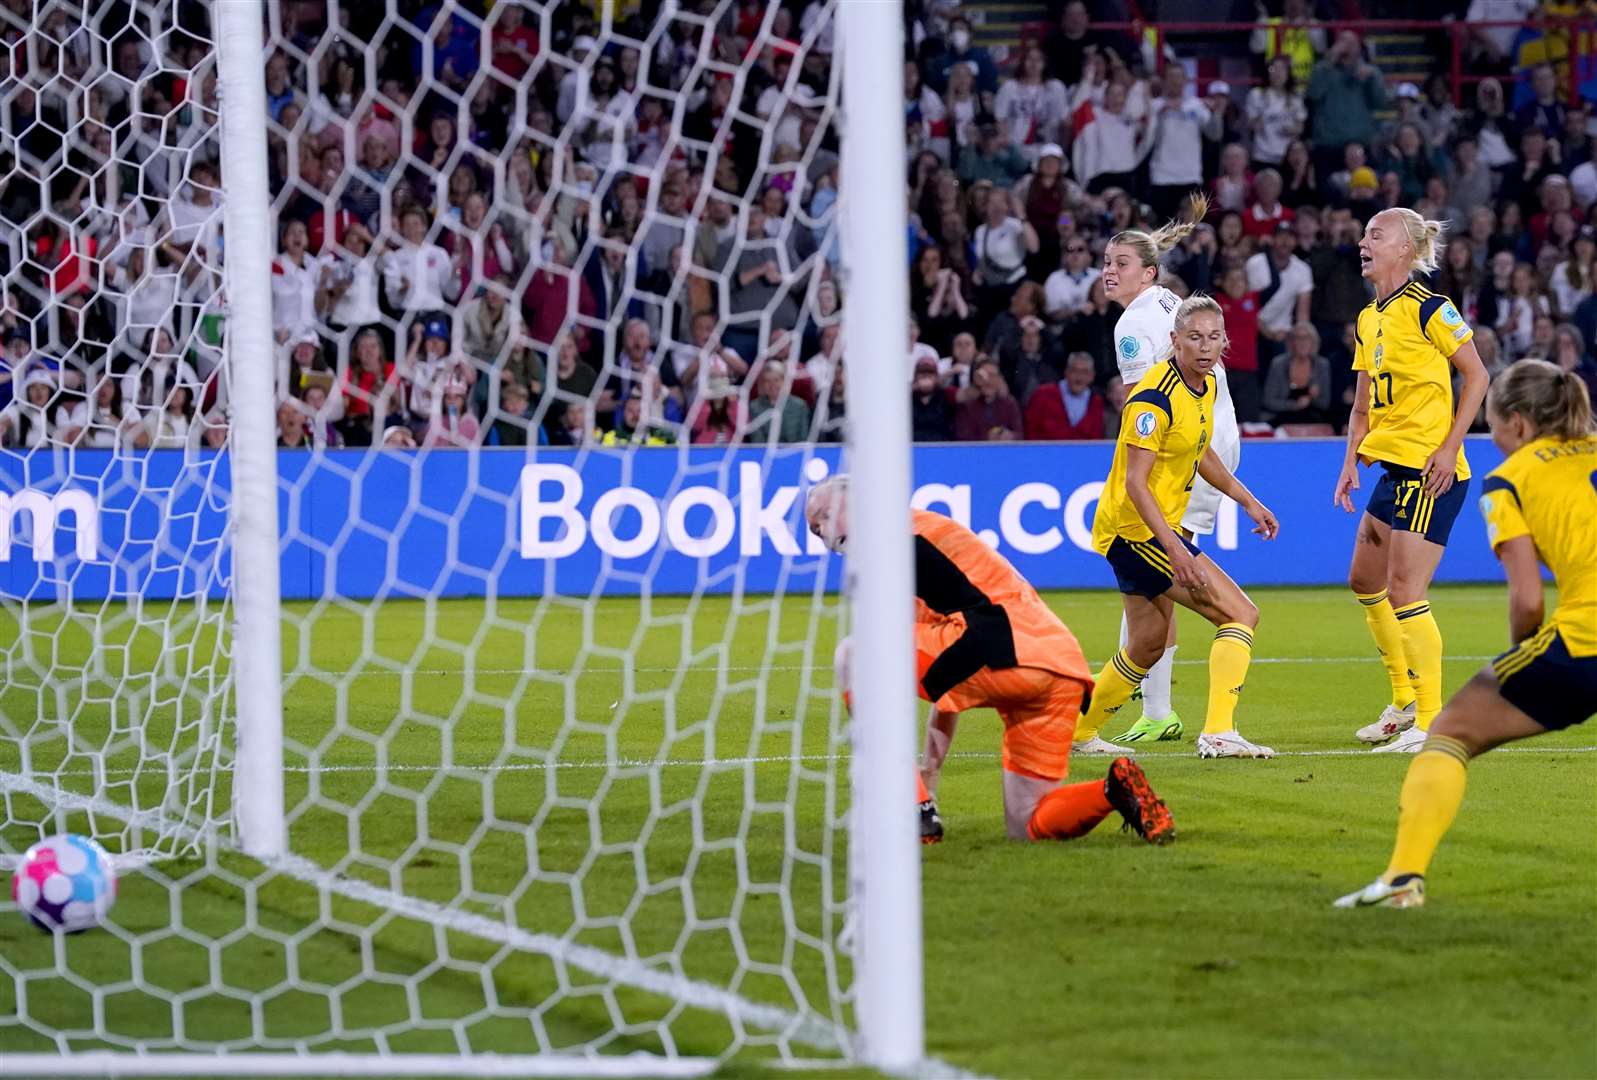 England's Alessia Russo, born in Maidstone, scores the third goal during the UEFA Women's Euro 2022 semi-final match at Bramall Lane, Sheffield, against Sweden on Tuesday. Picture: PA / Danny Lawson